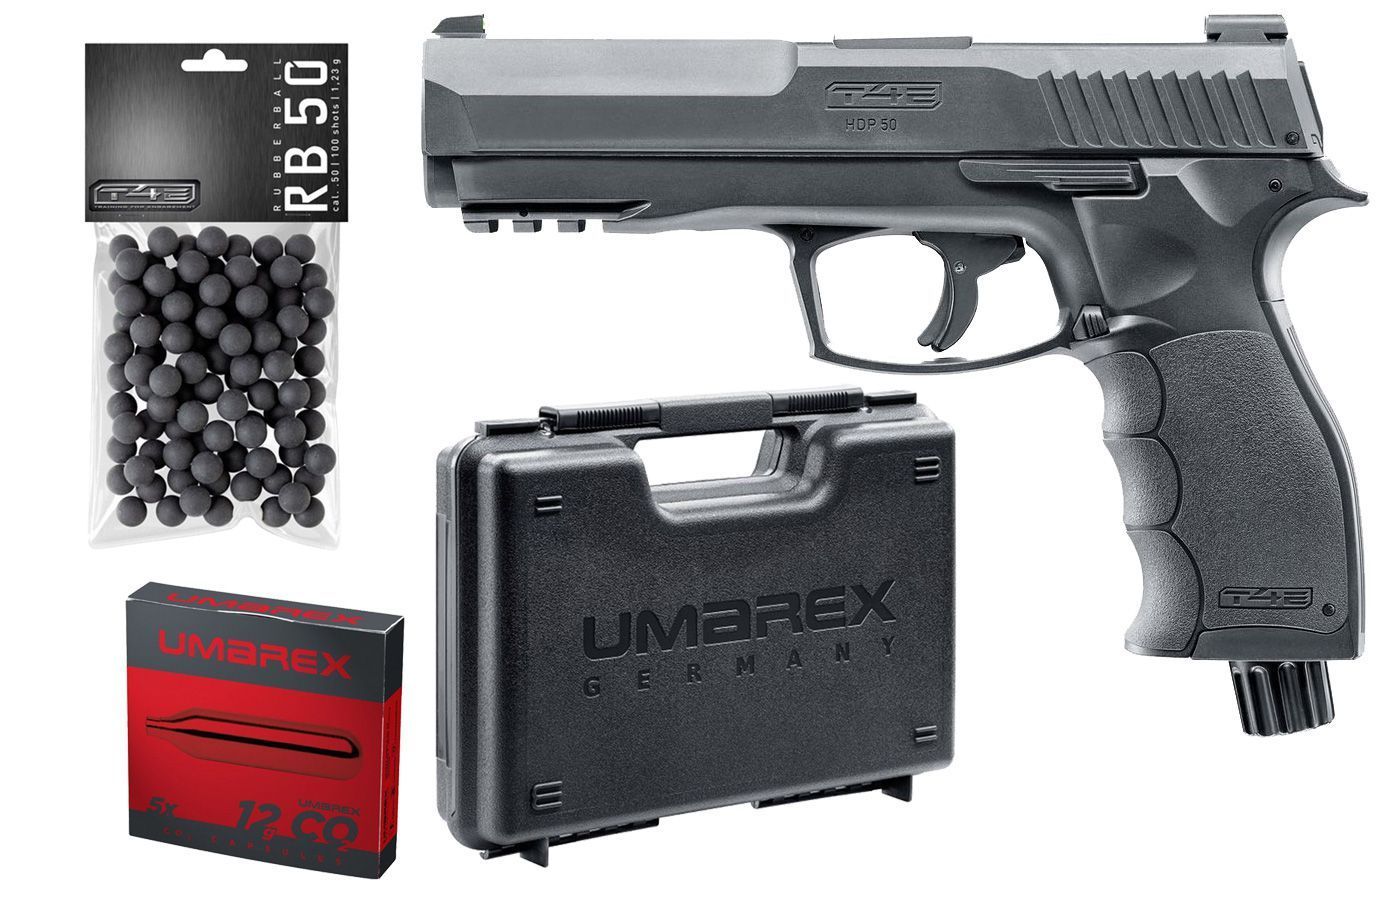 Pack Pistolet CO2 Walther Umarex T4E HDP 50 cal.50 + 100 billes